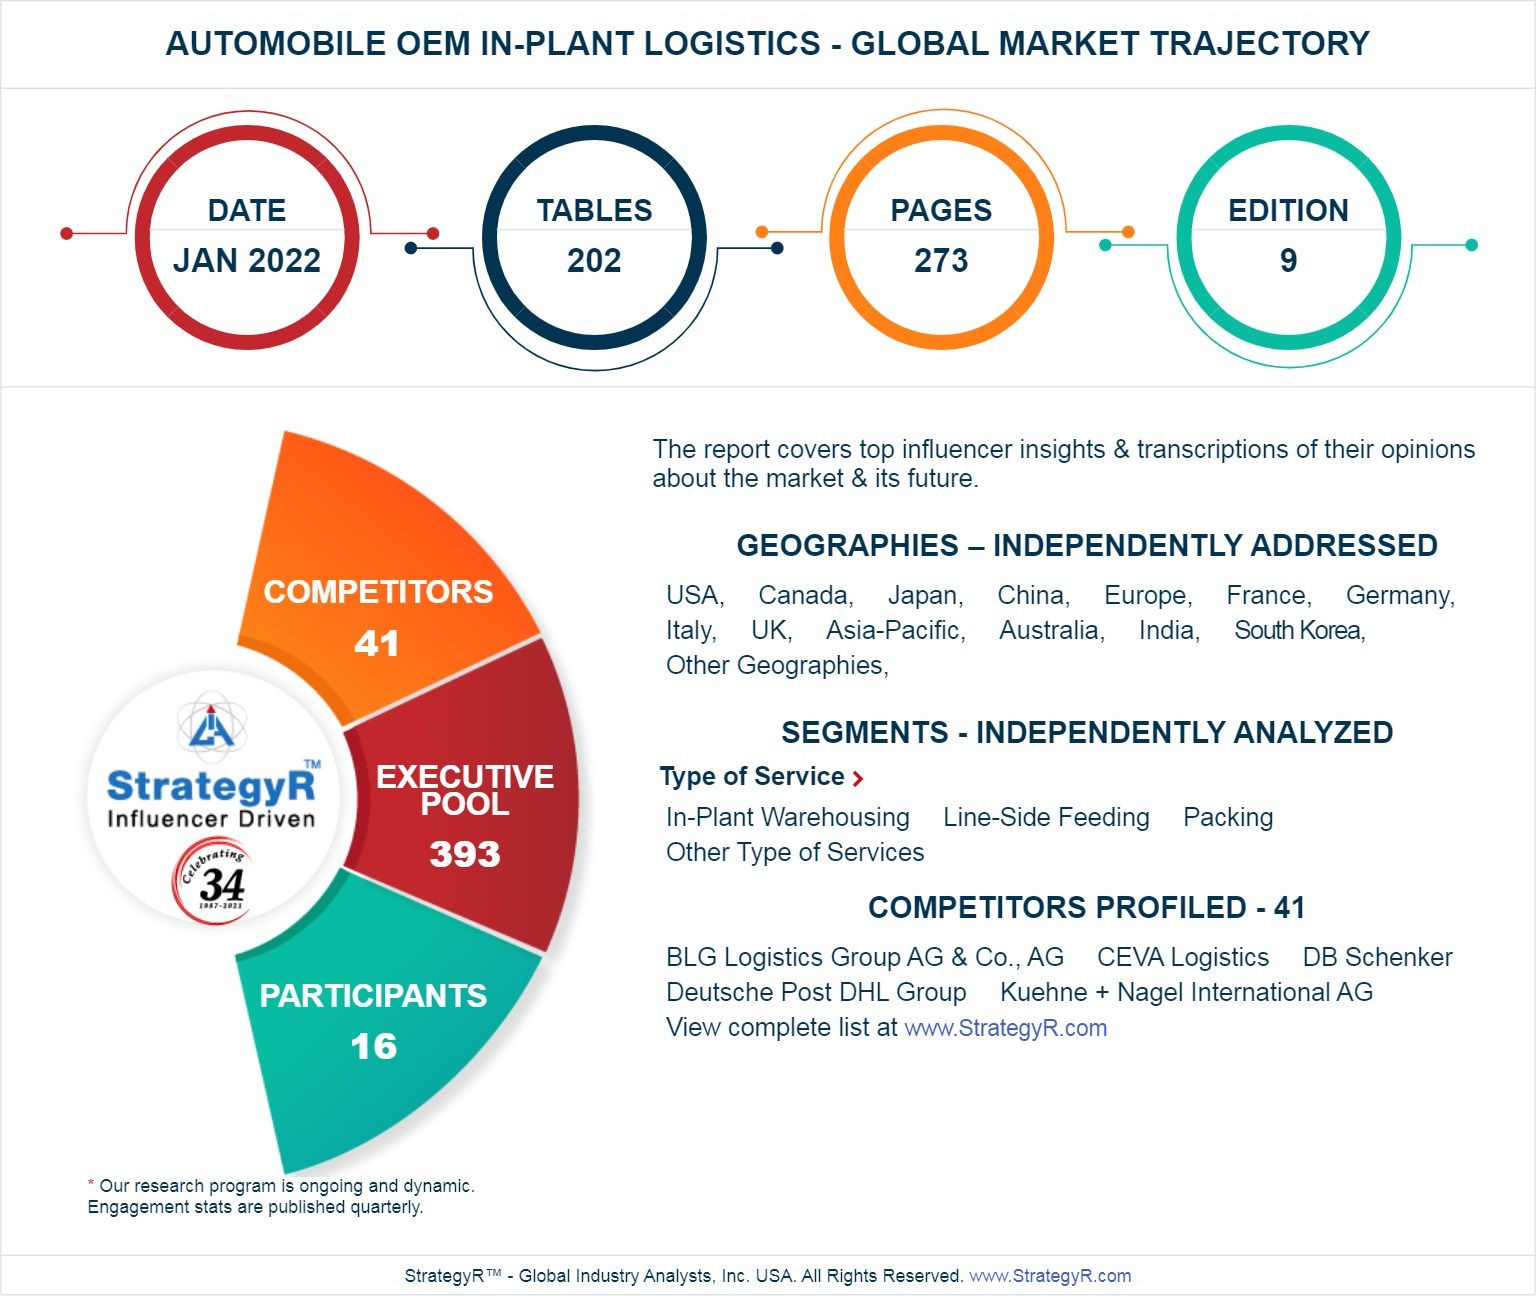 Global Industry Analysts Predicts the World Automobile OEM In-plant Logistics Market to Reach $2.8 Billion by 2026